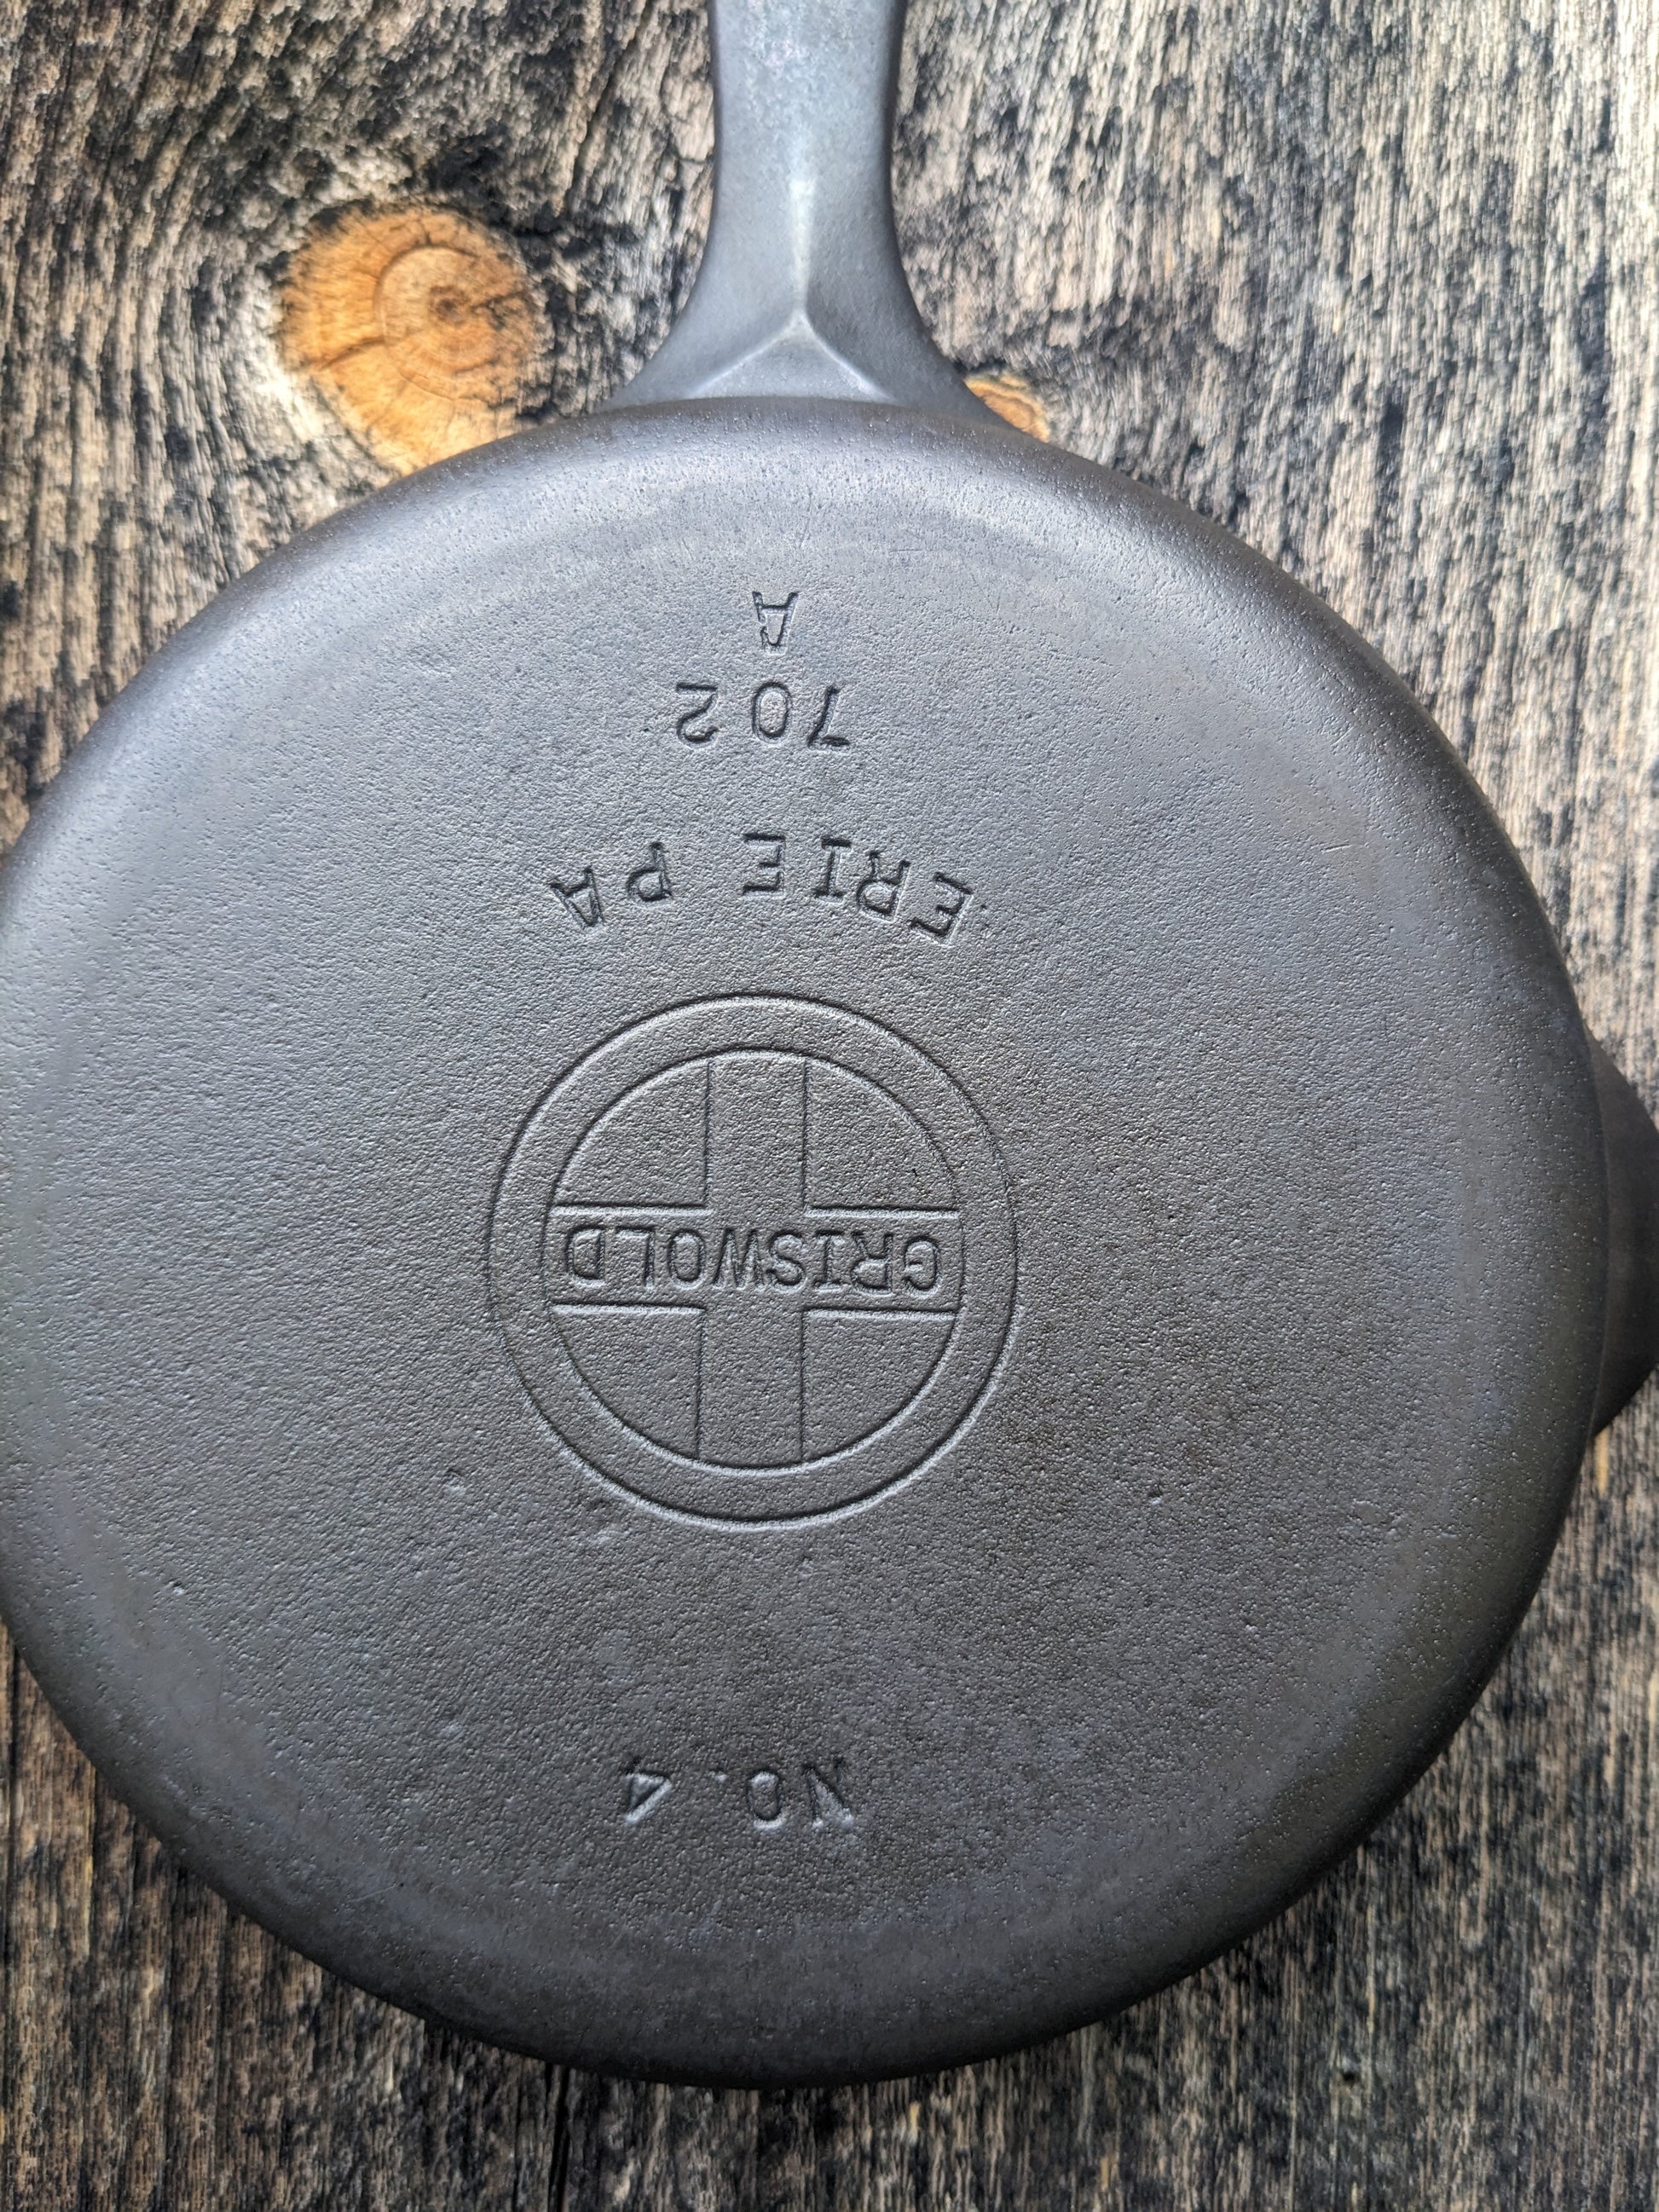 Griswold #4 Cast Iron Skillet Small Block Logo – The Forge at